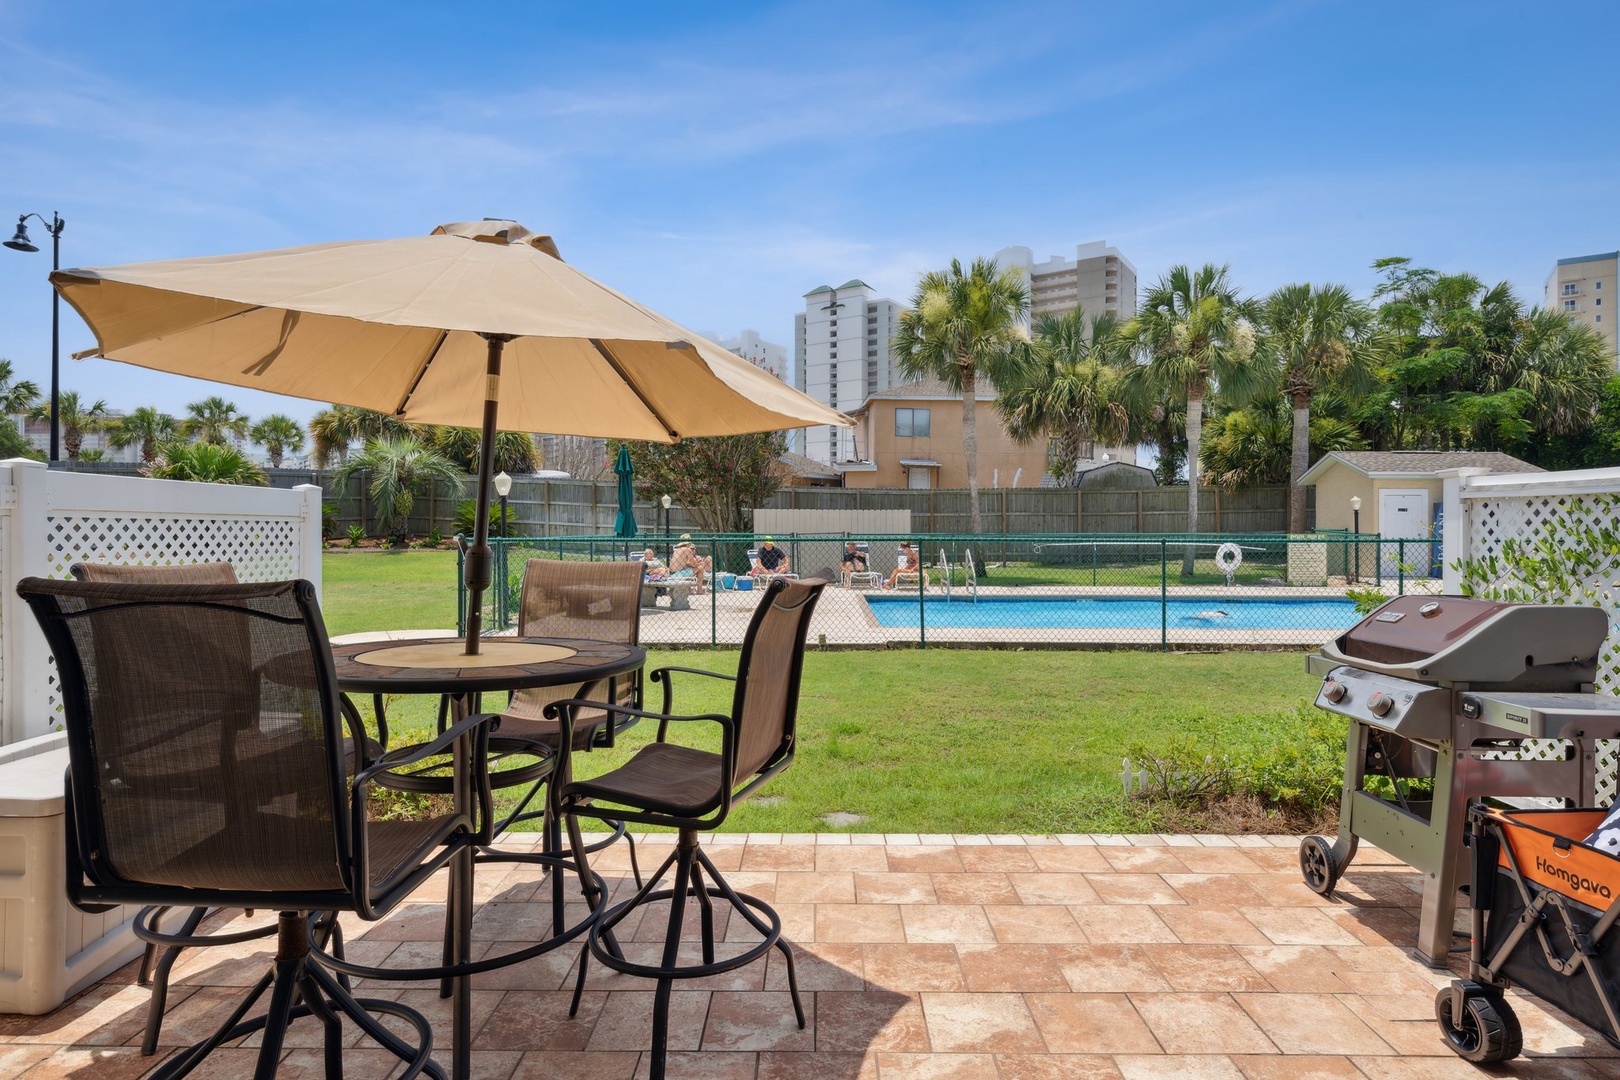 Outdoor seating with umbrella by the pool